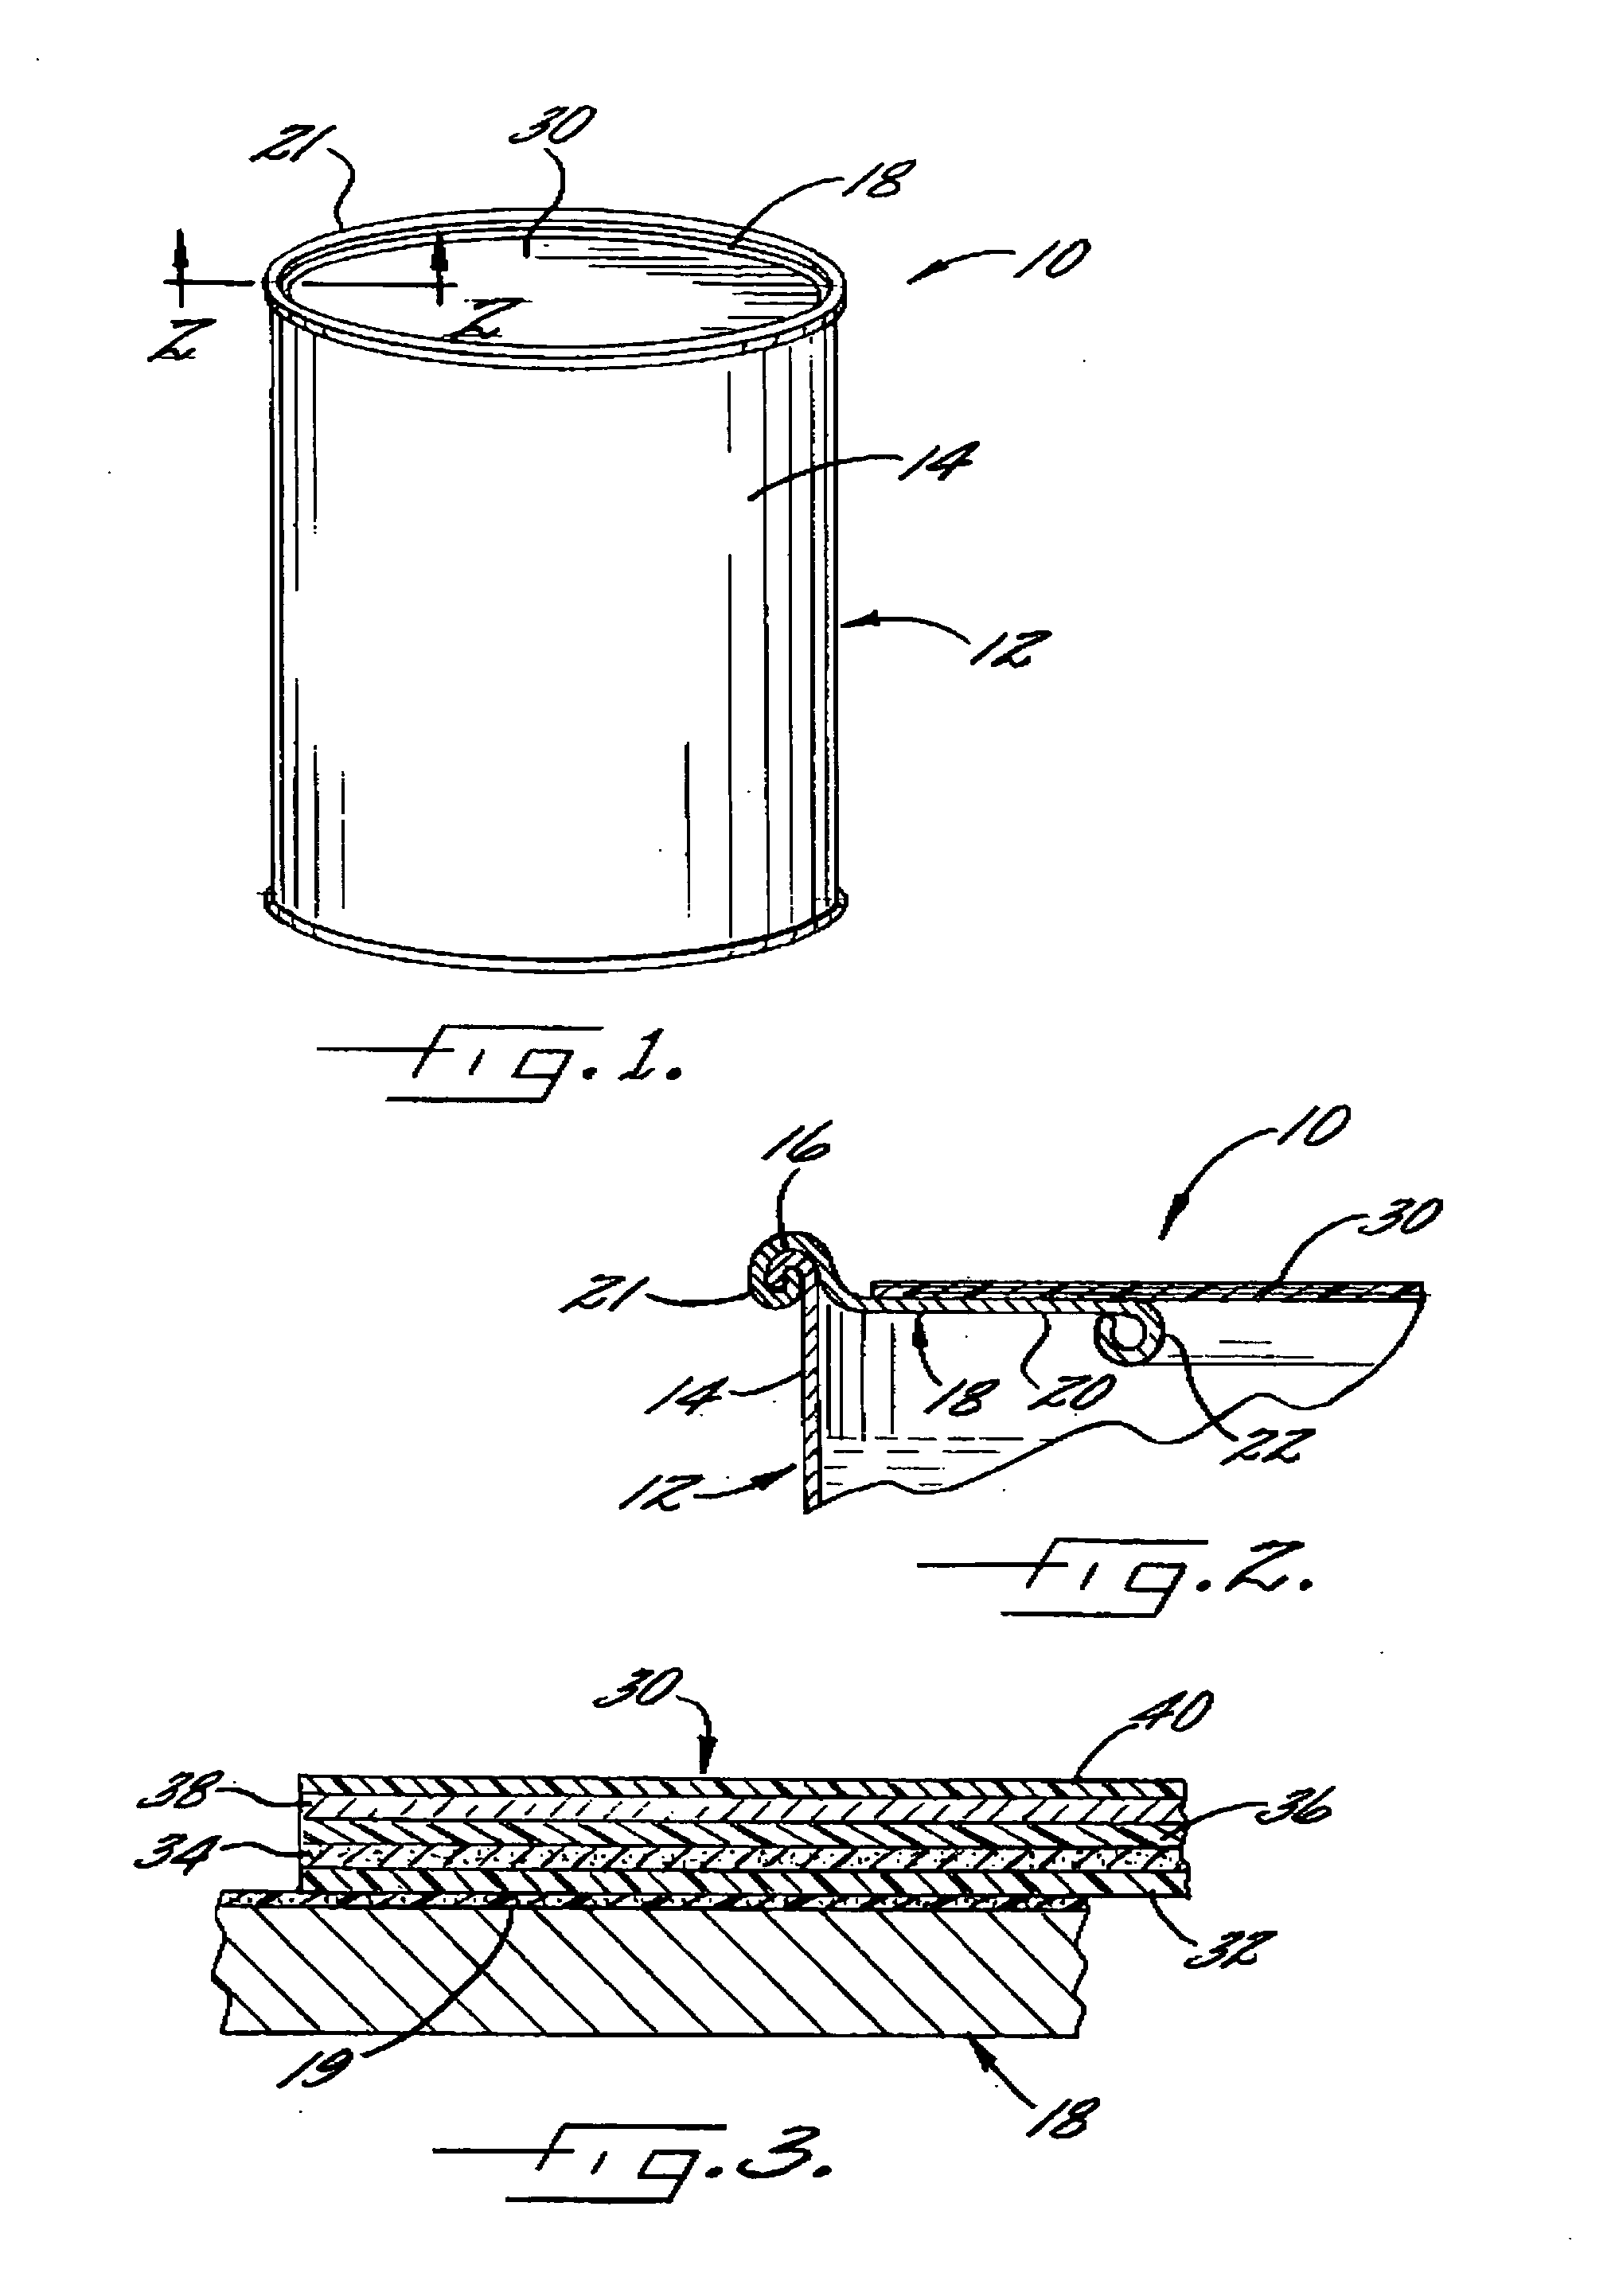 Container closure with dual heat seal and magnetic seal